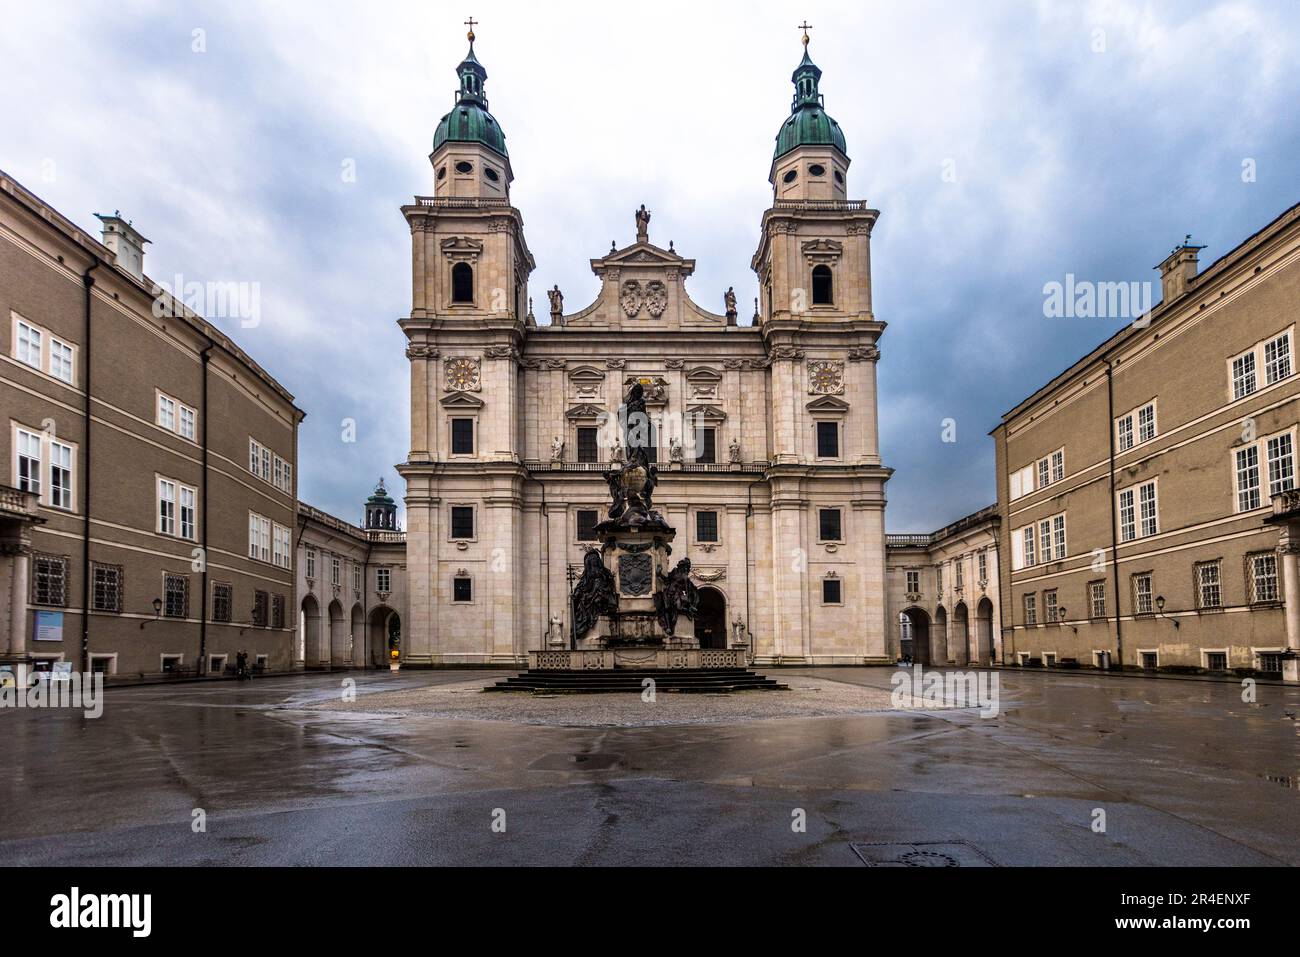 The early Baroque cathedral of Salzburg, surrounded by three squares, formed the center of the spiritual life of the city. Here is the baptismal font in which Mozart was baptized the day after his birth. Salzburg, Austria Stock Photo